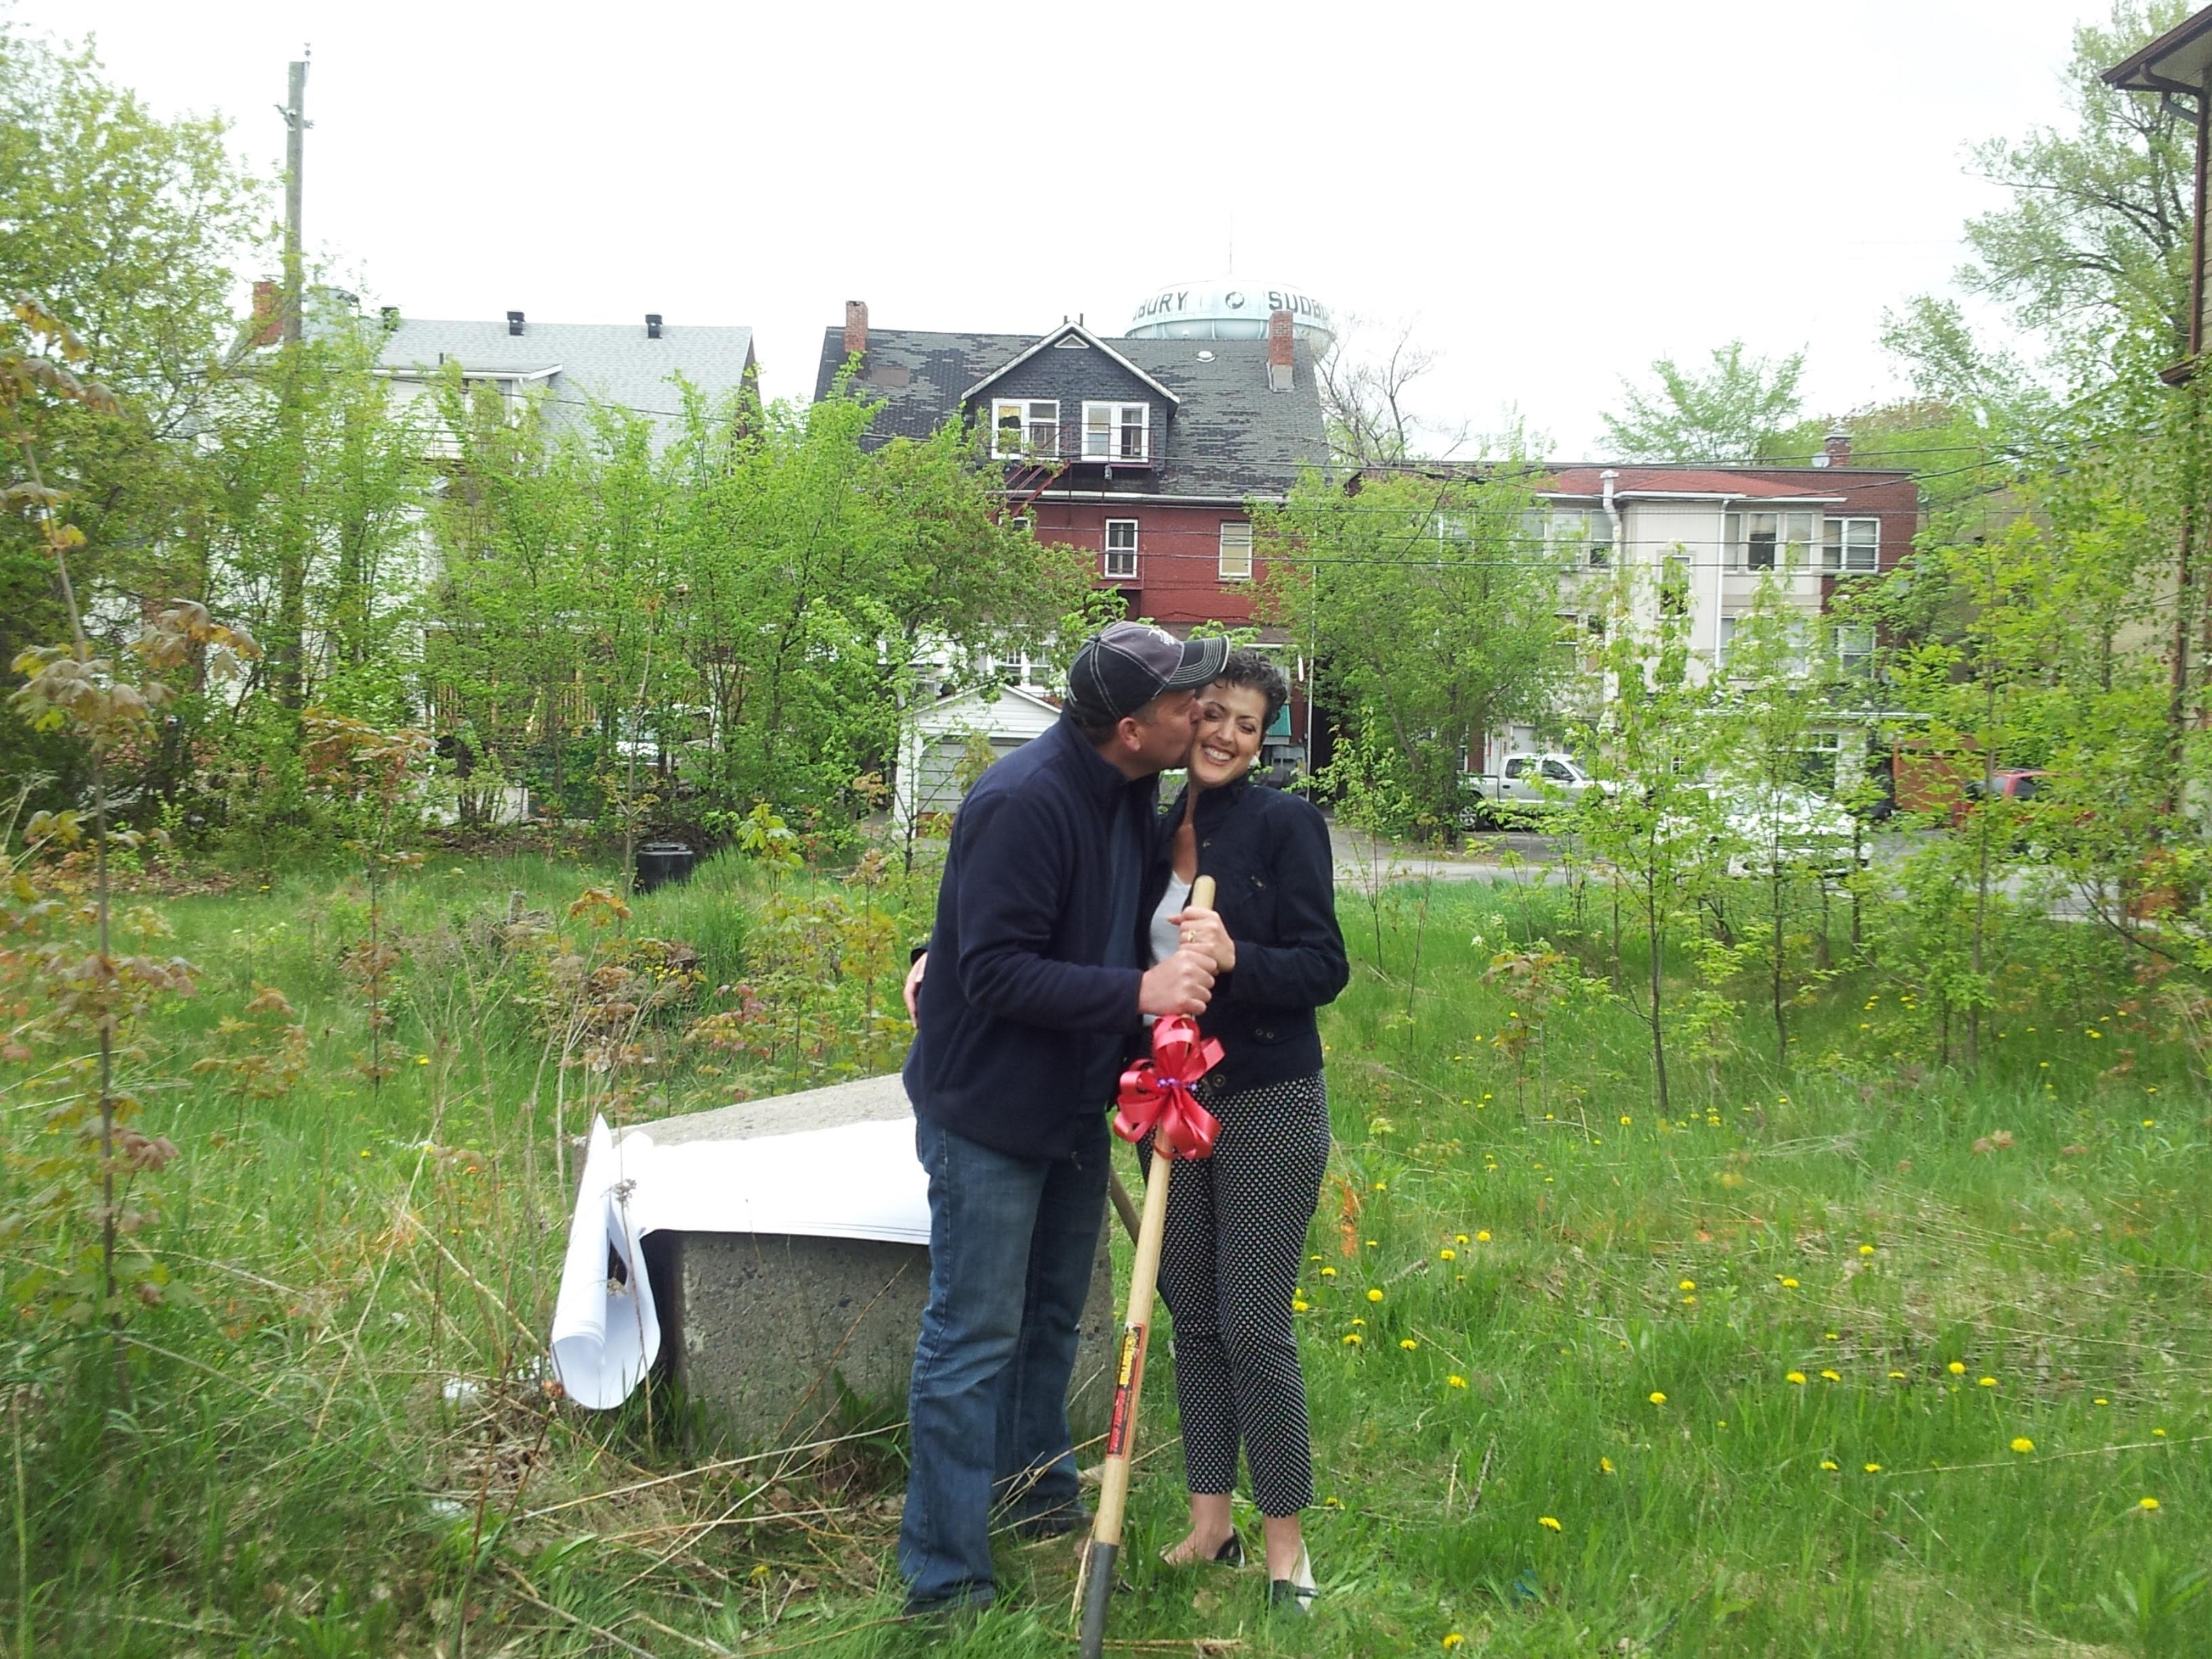 Senator Forest-Niesing and husband Robert Niesing break ground on what would become their dream home in the heart of Sudbury.